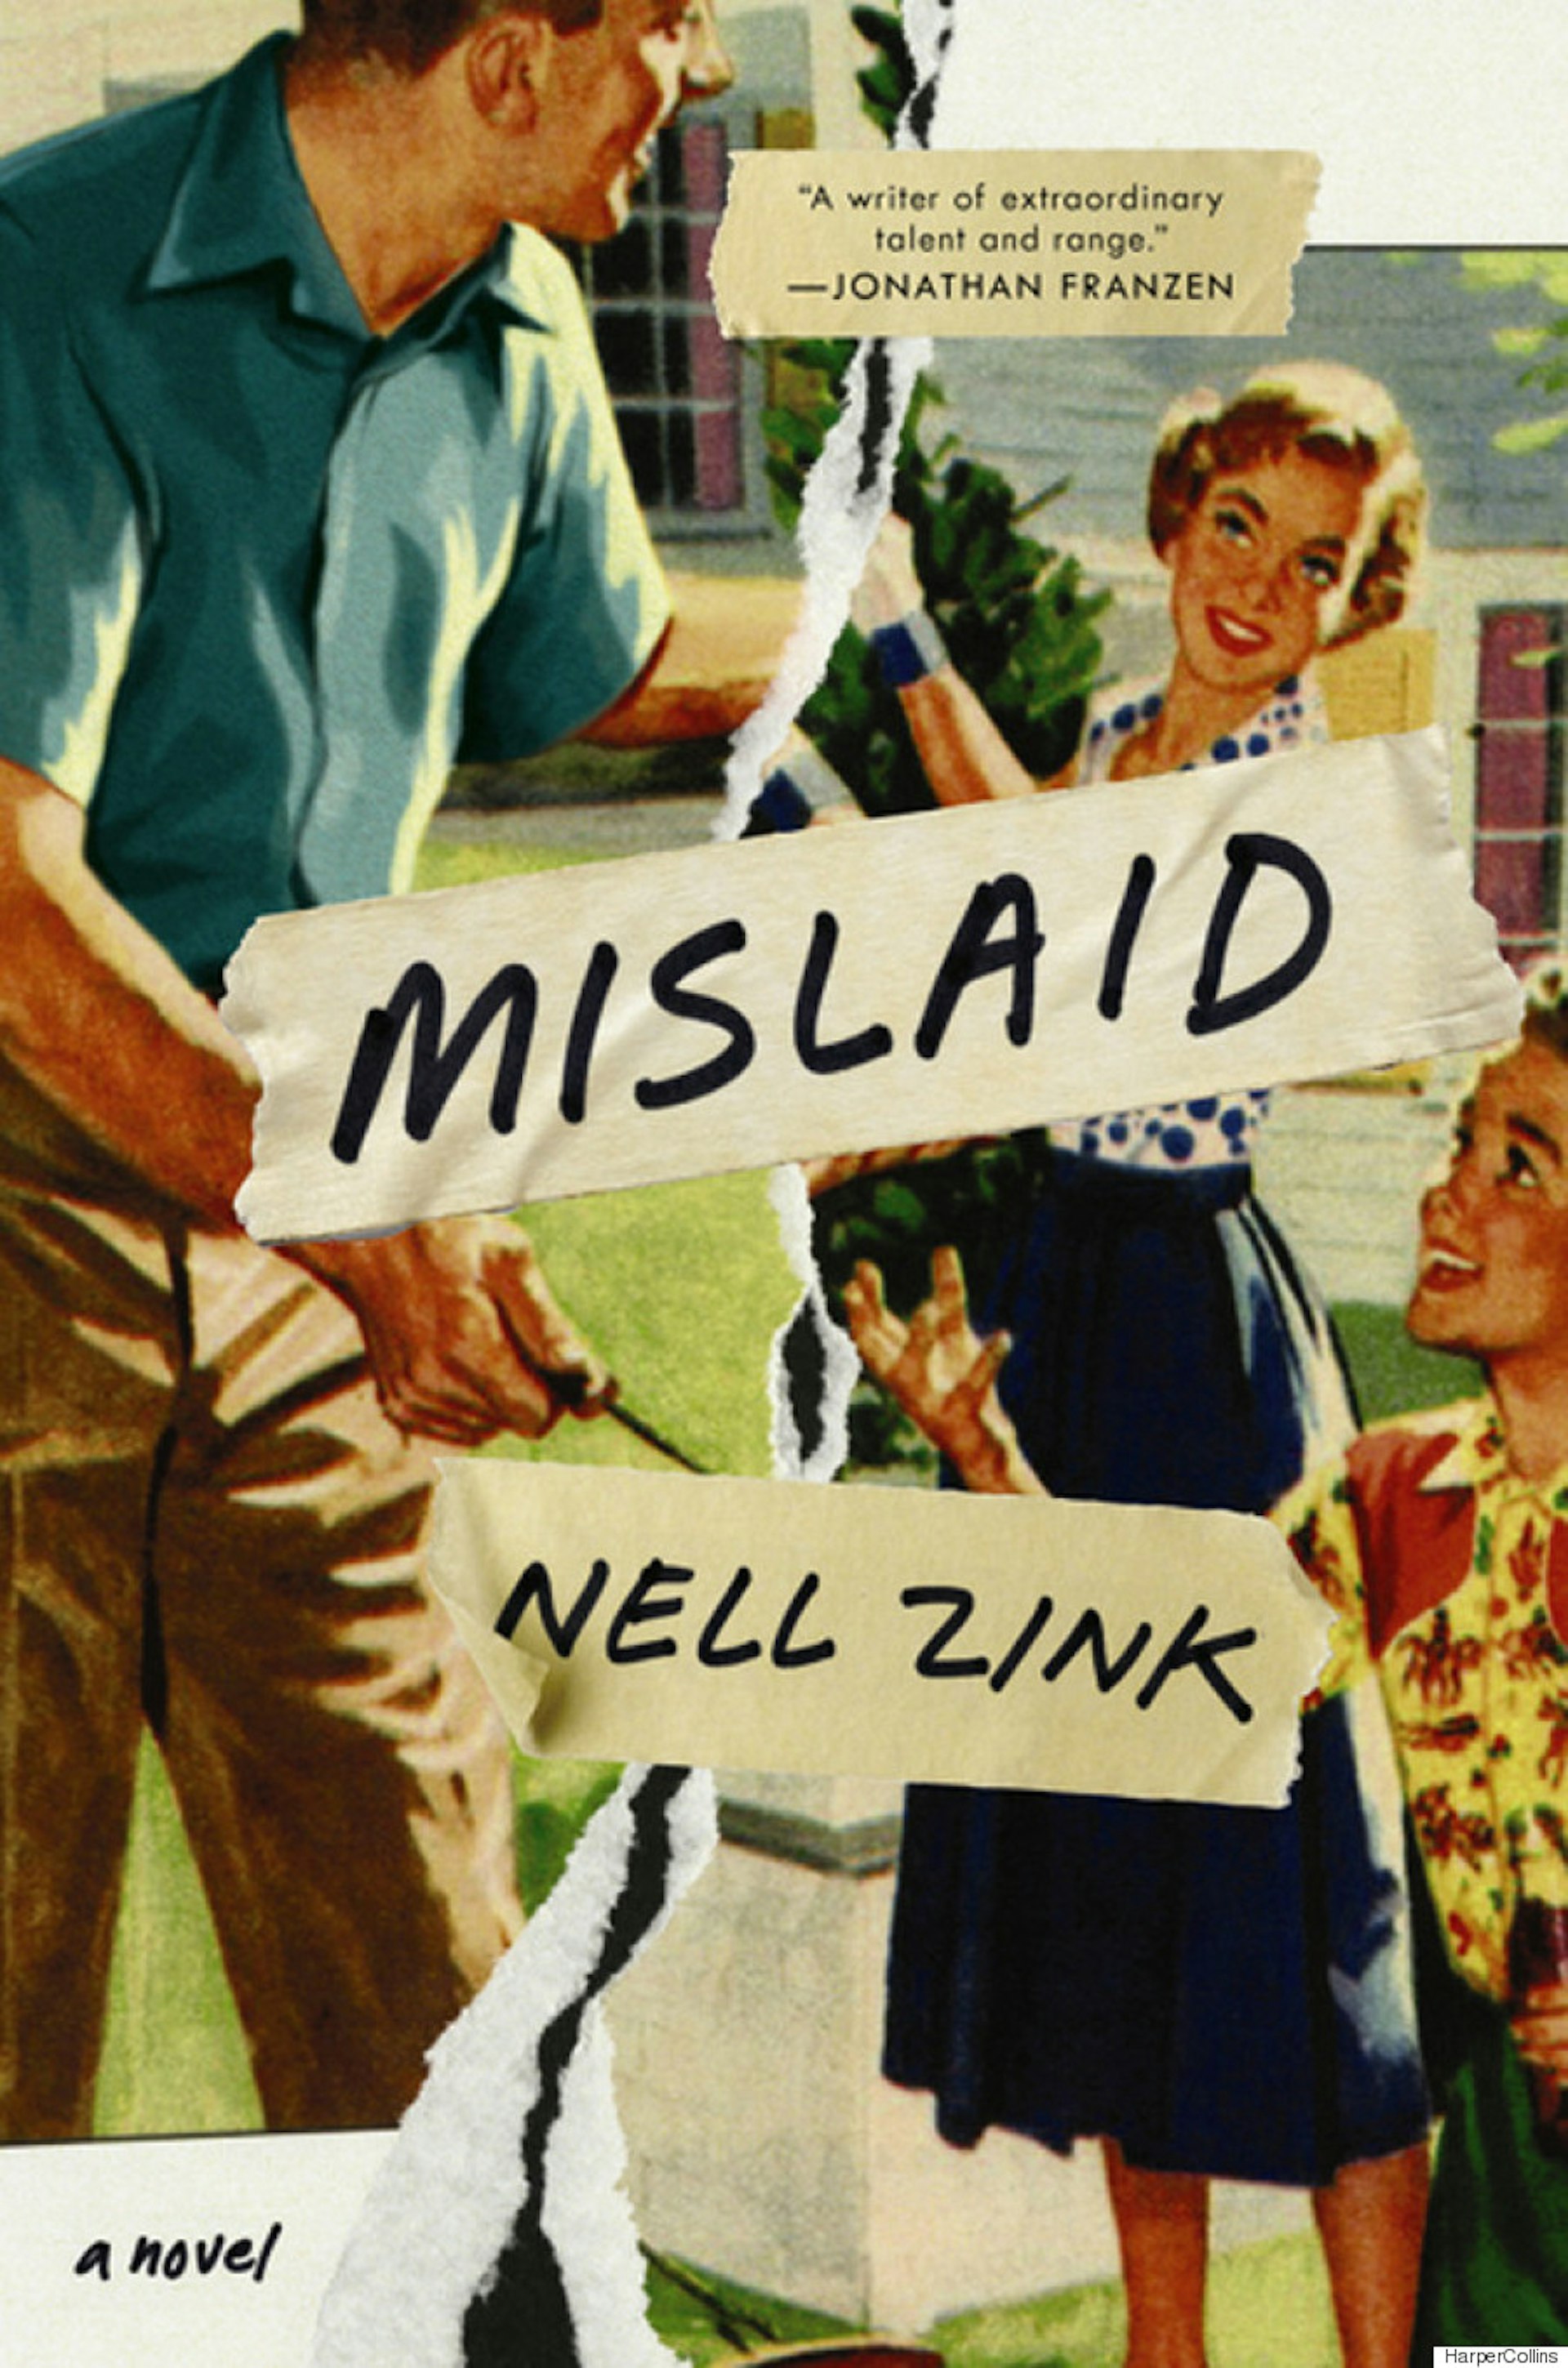 NELL-ZINK-book-mislaid-huck